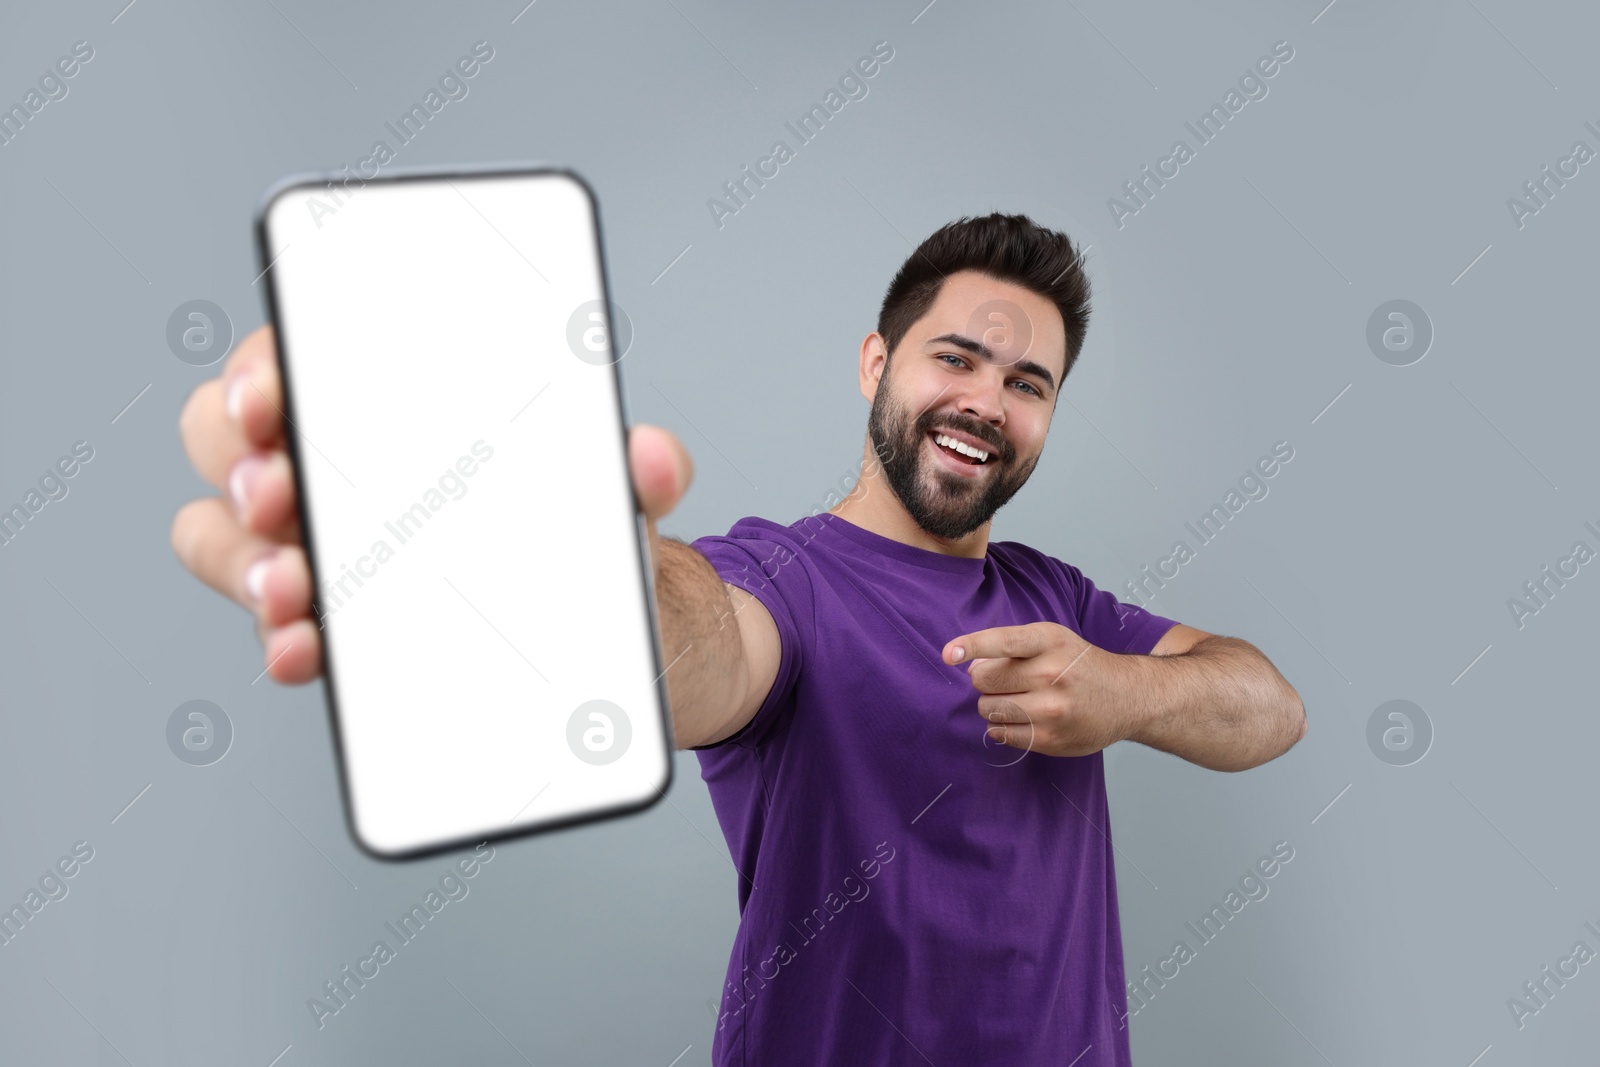 Photo of Young man showing smartphone in hand and pointing at it on light grey background